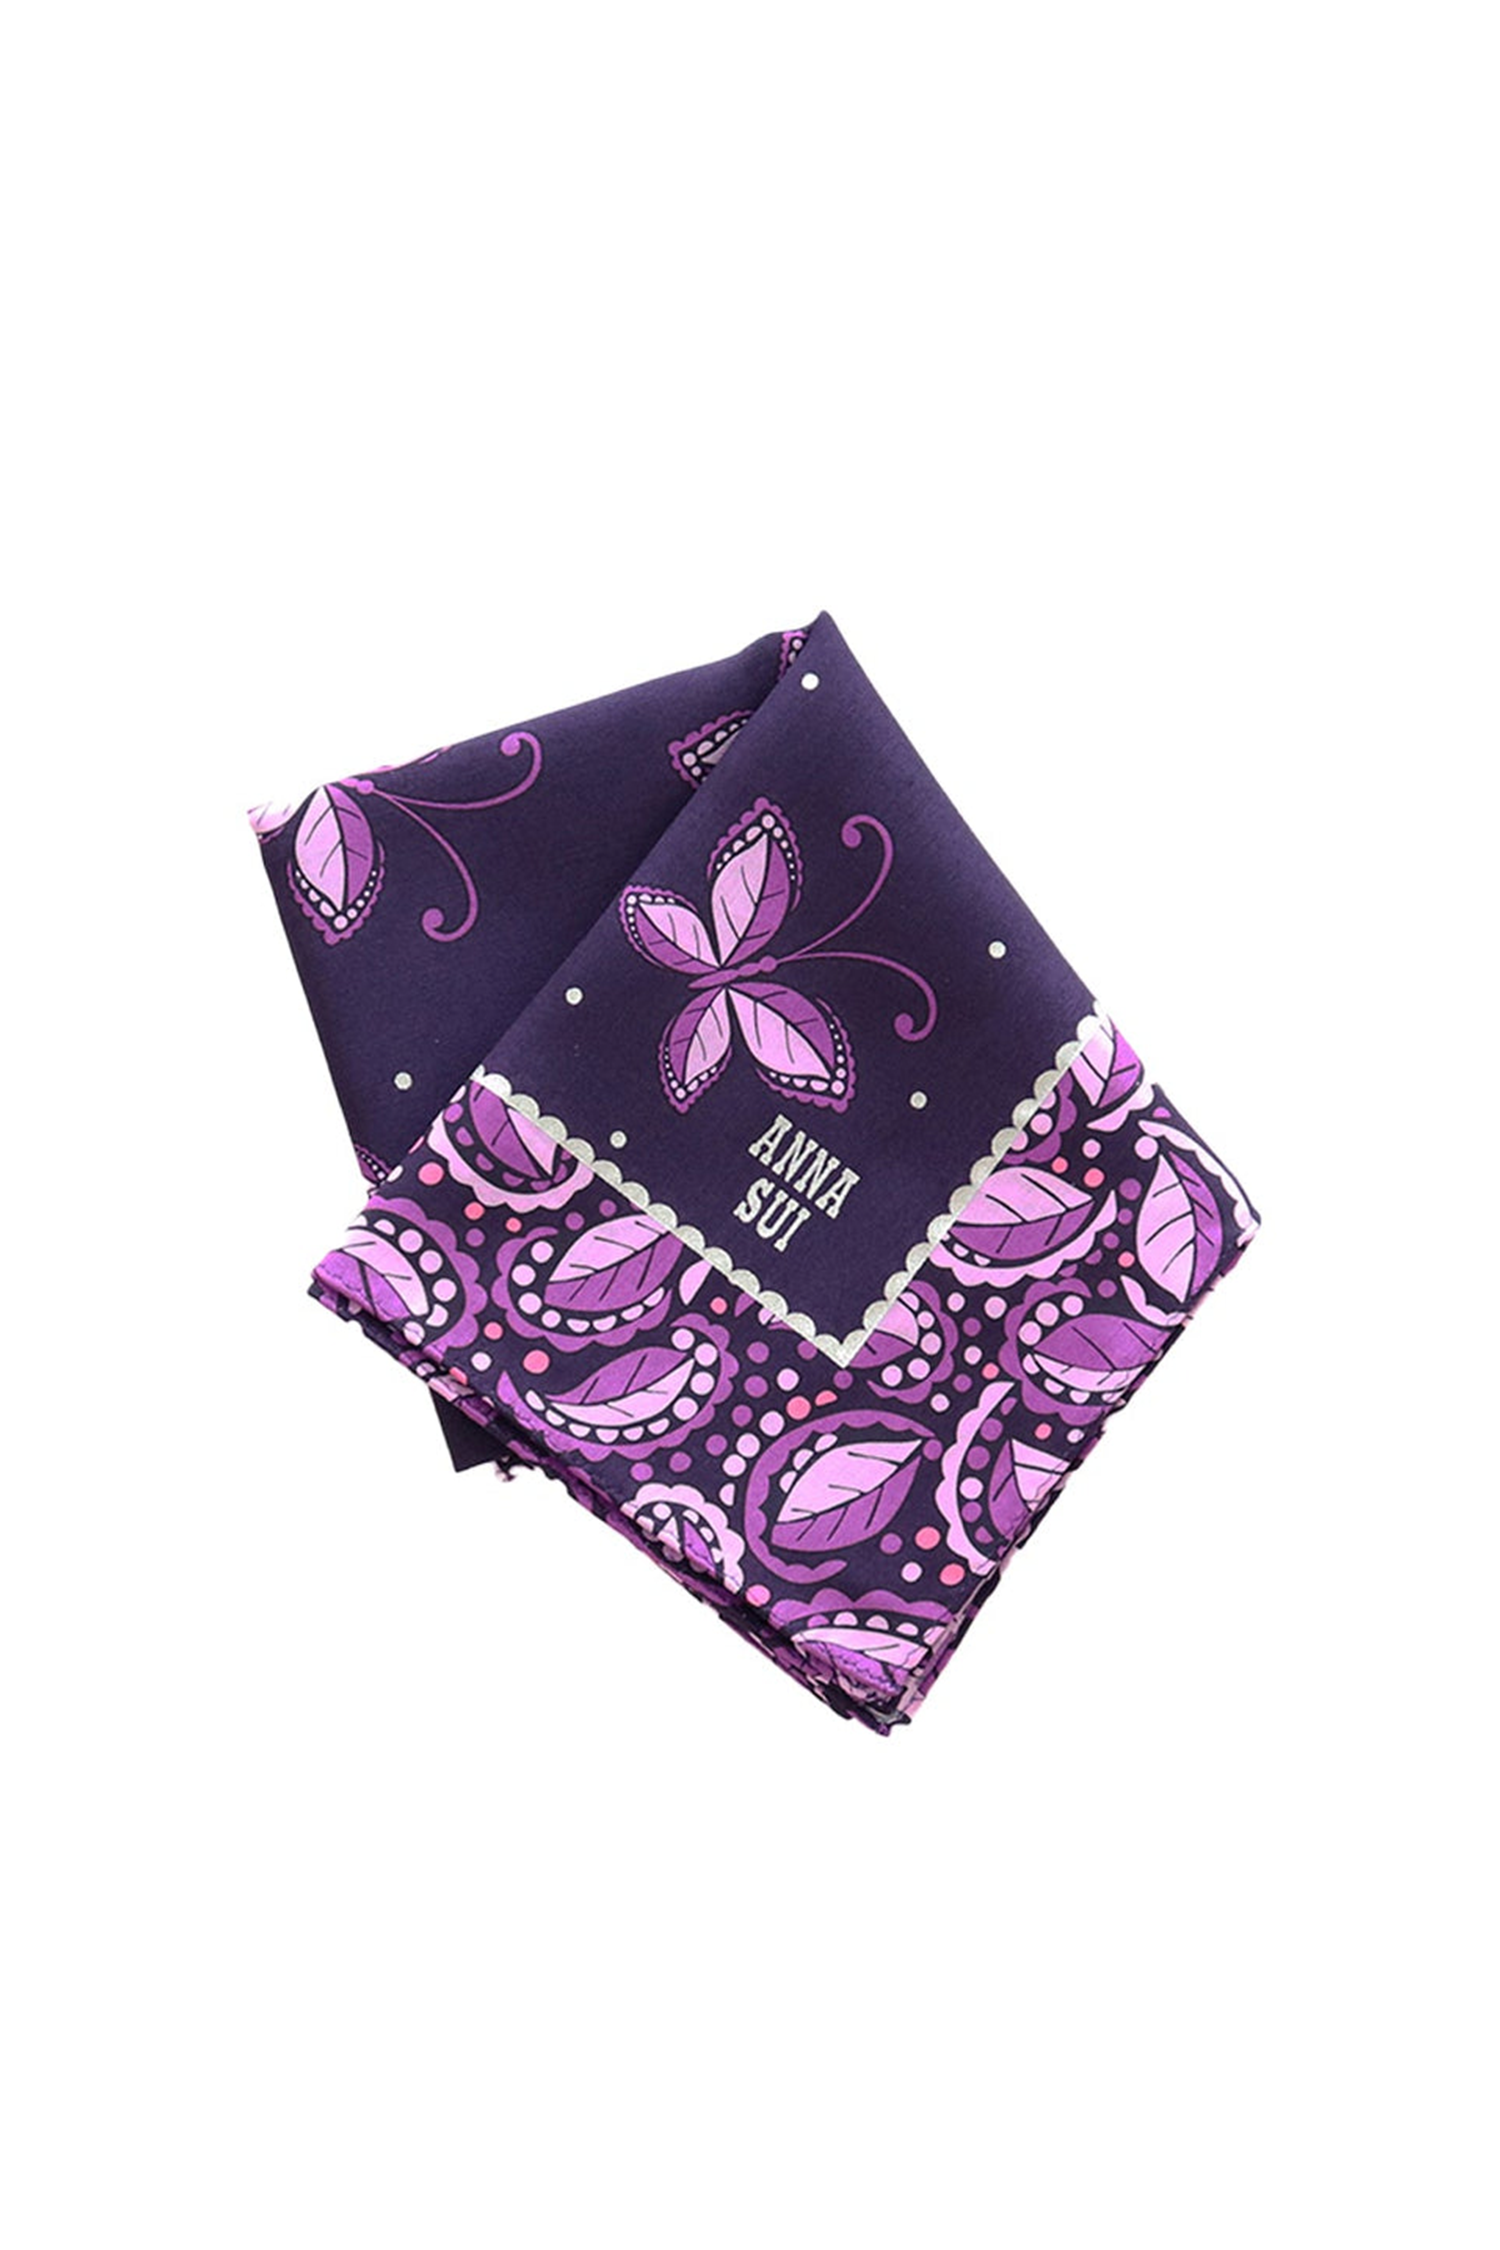 Handkerchief, purple with light purple butterfly and white Anna Sui, large floral hue of purple border